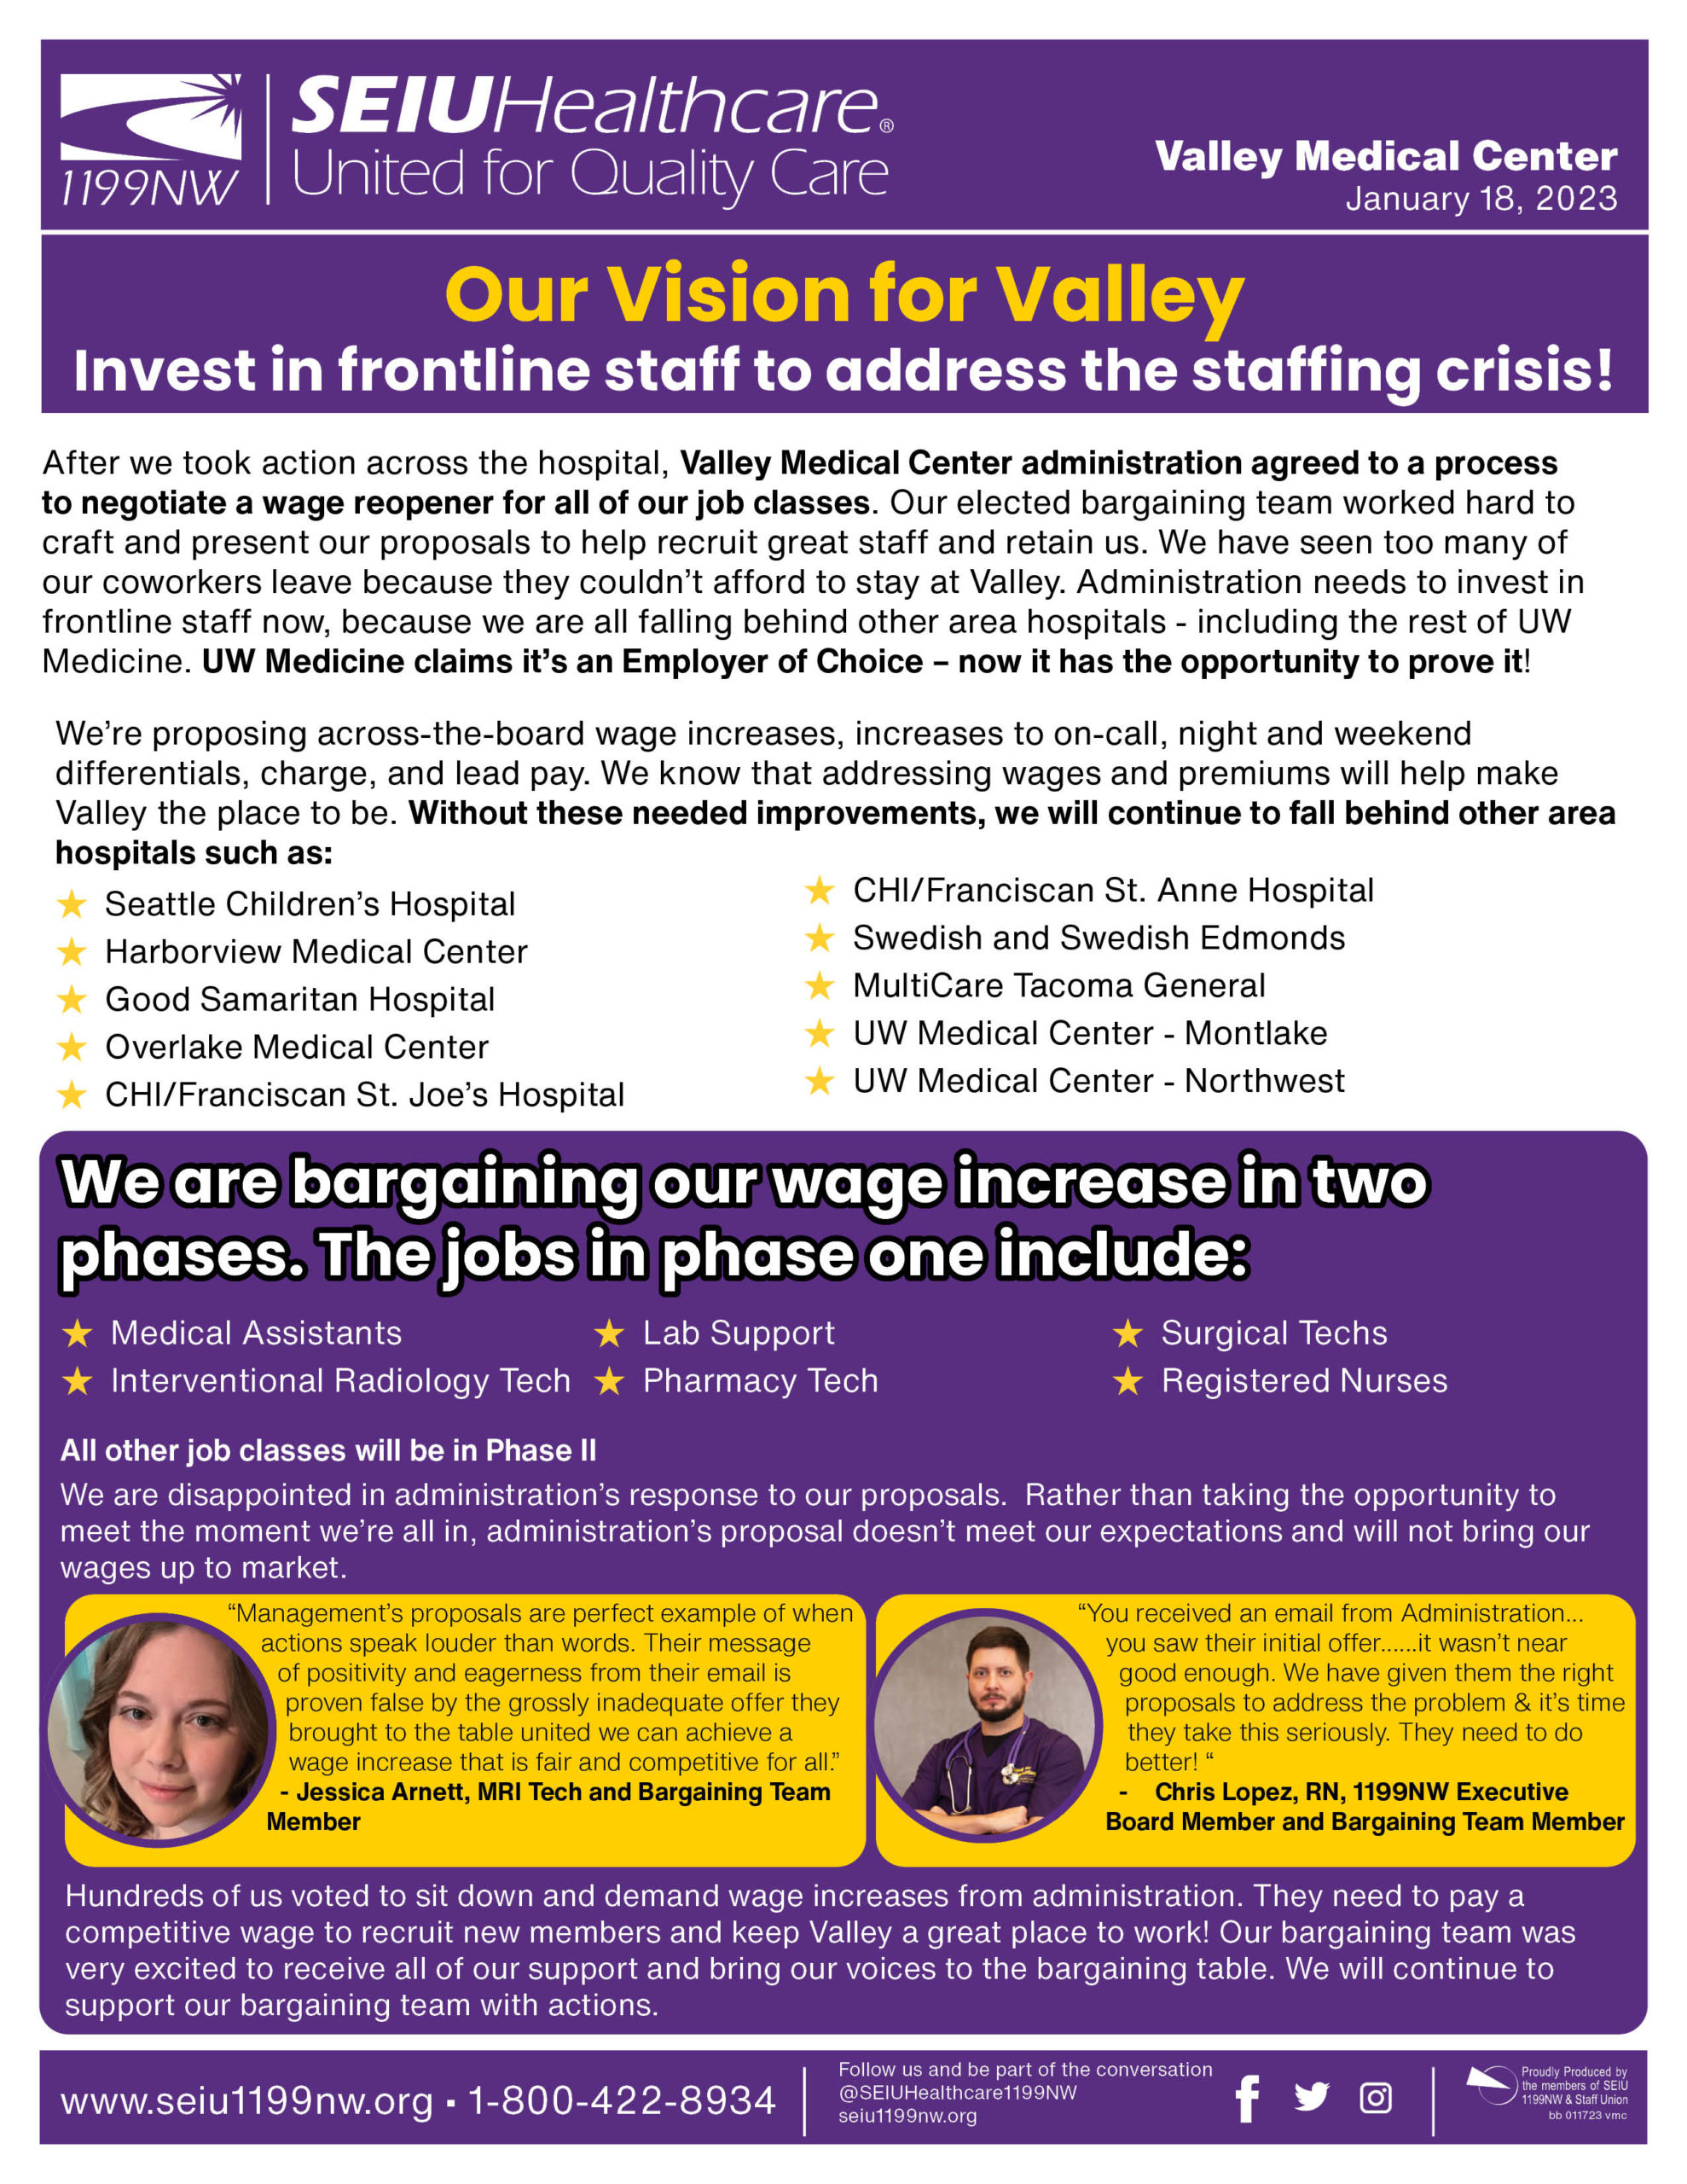 Our Vision for Valley - Invest in frontline staff to address the staffing crisis!